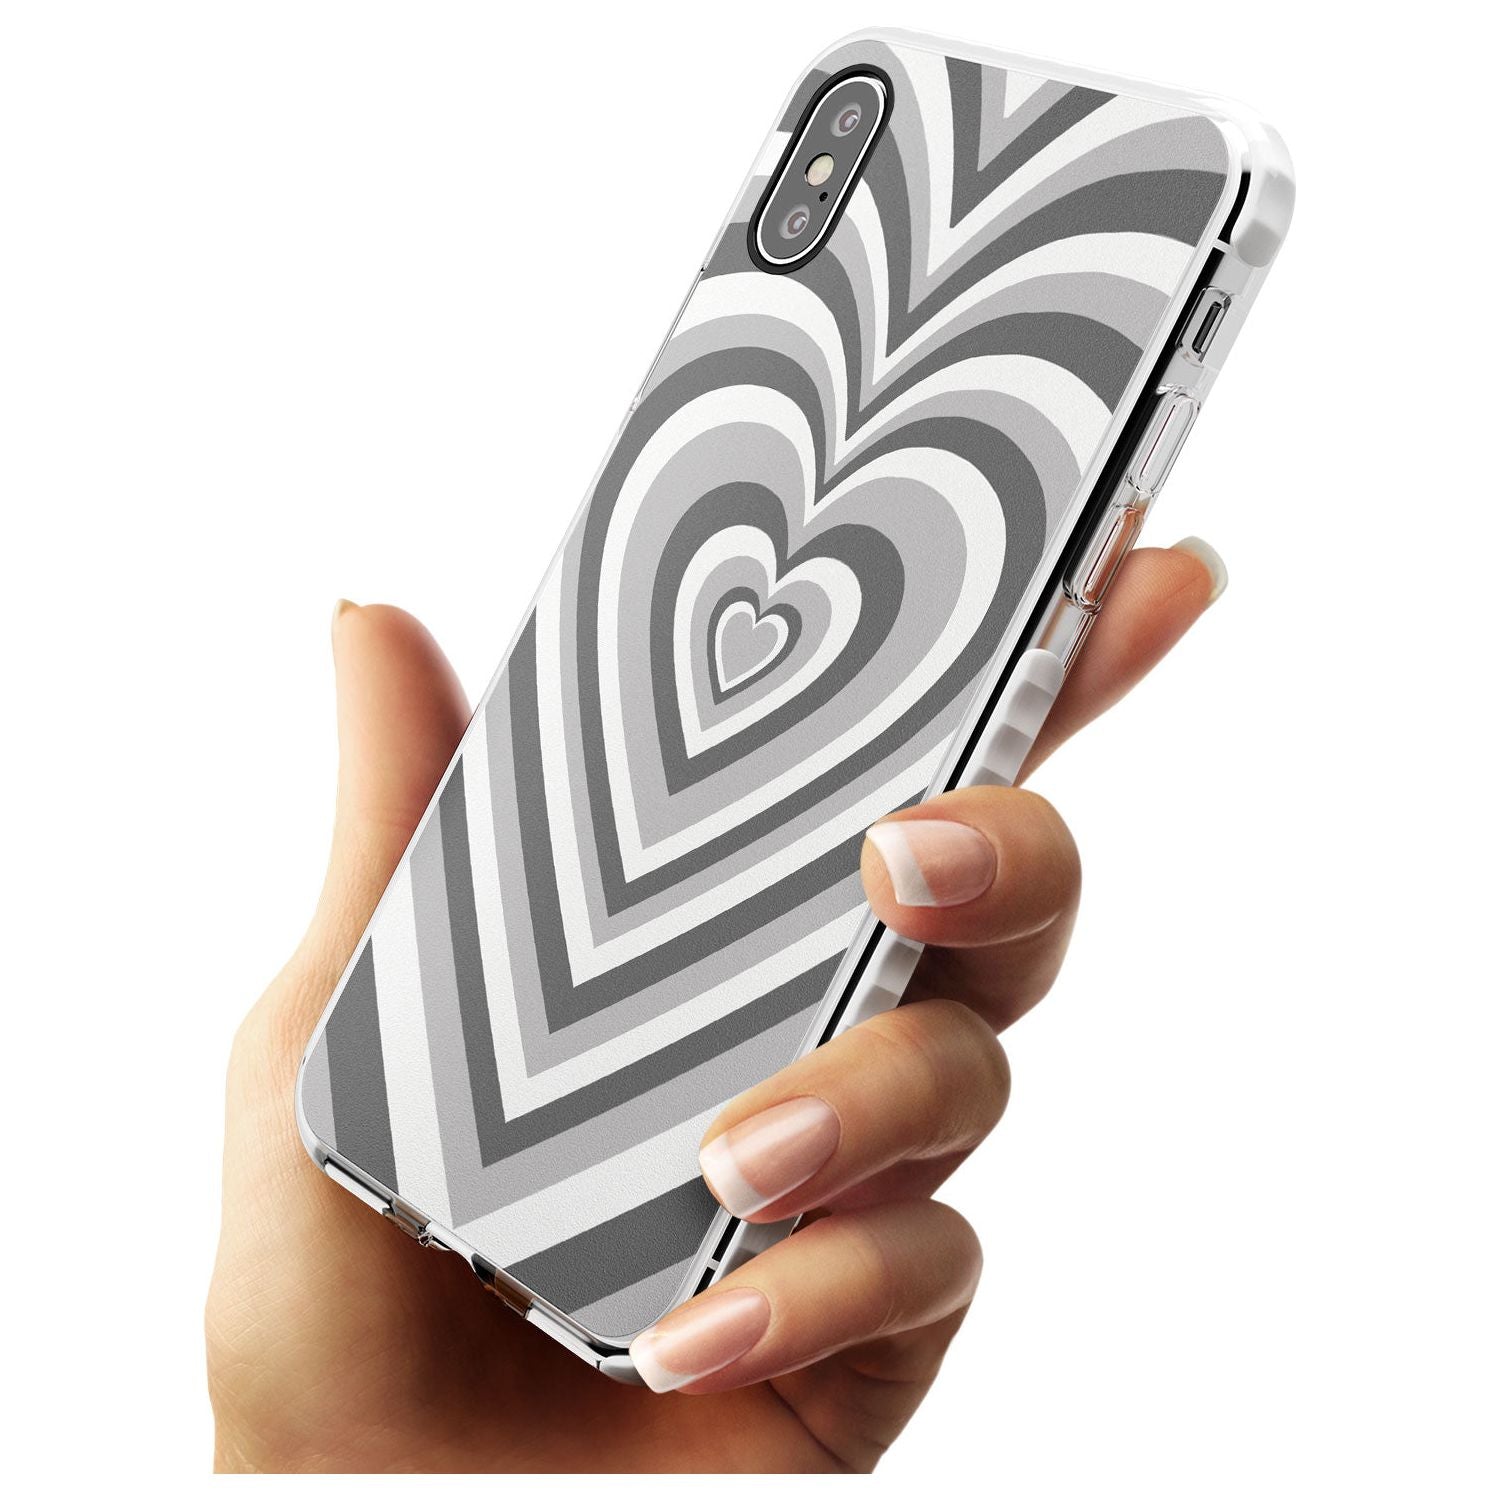 Monochrome Heart Illusion Impact Phone Case for iPhone X XS Max XR